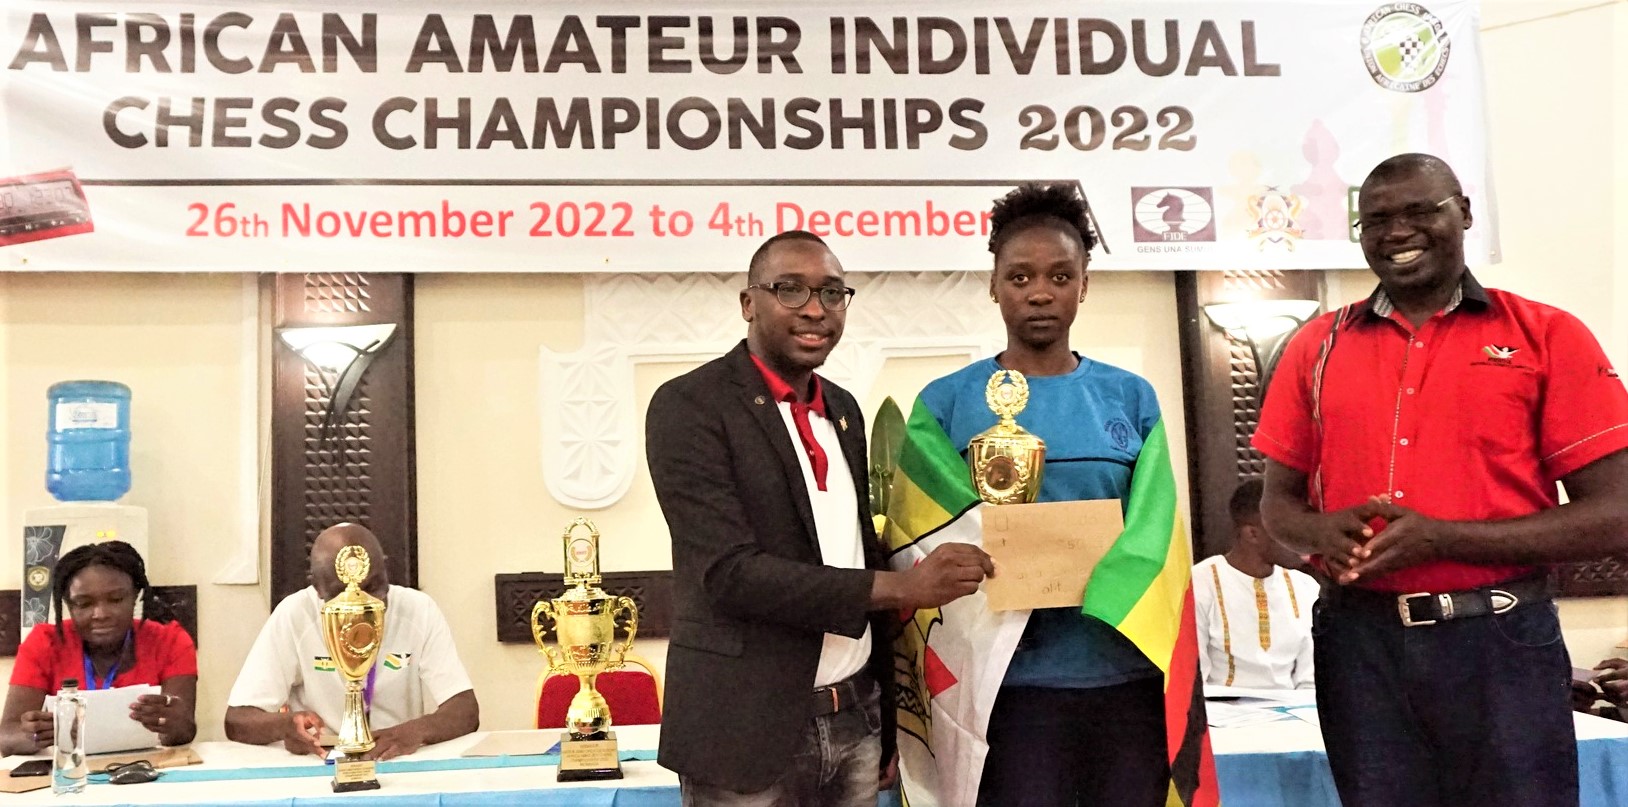 Prize winners and officials pose for a group photo at the end of the African Amateur 2022 Chess Championship.